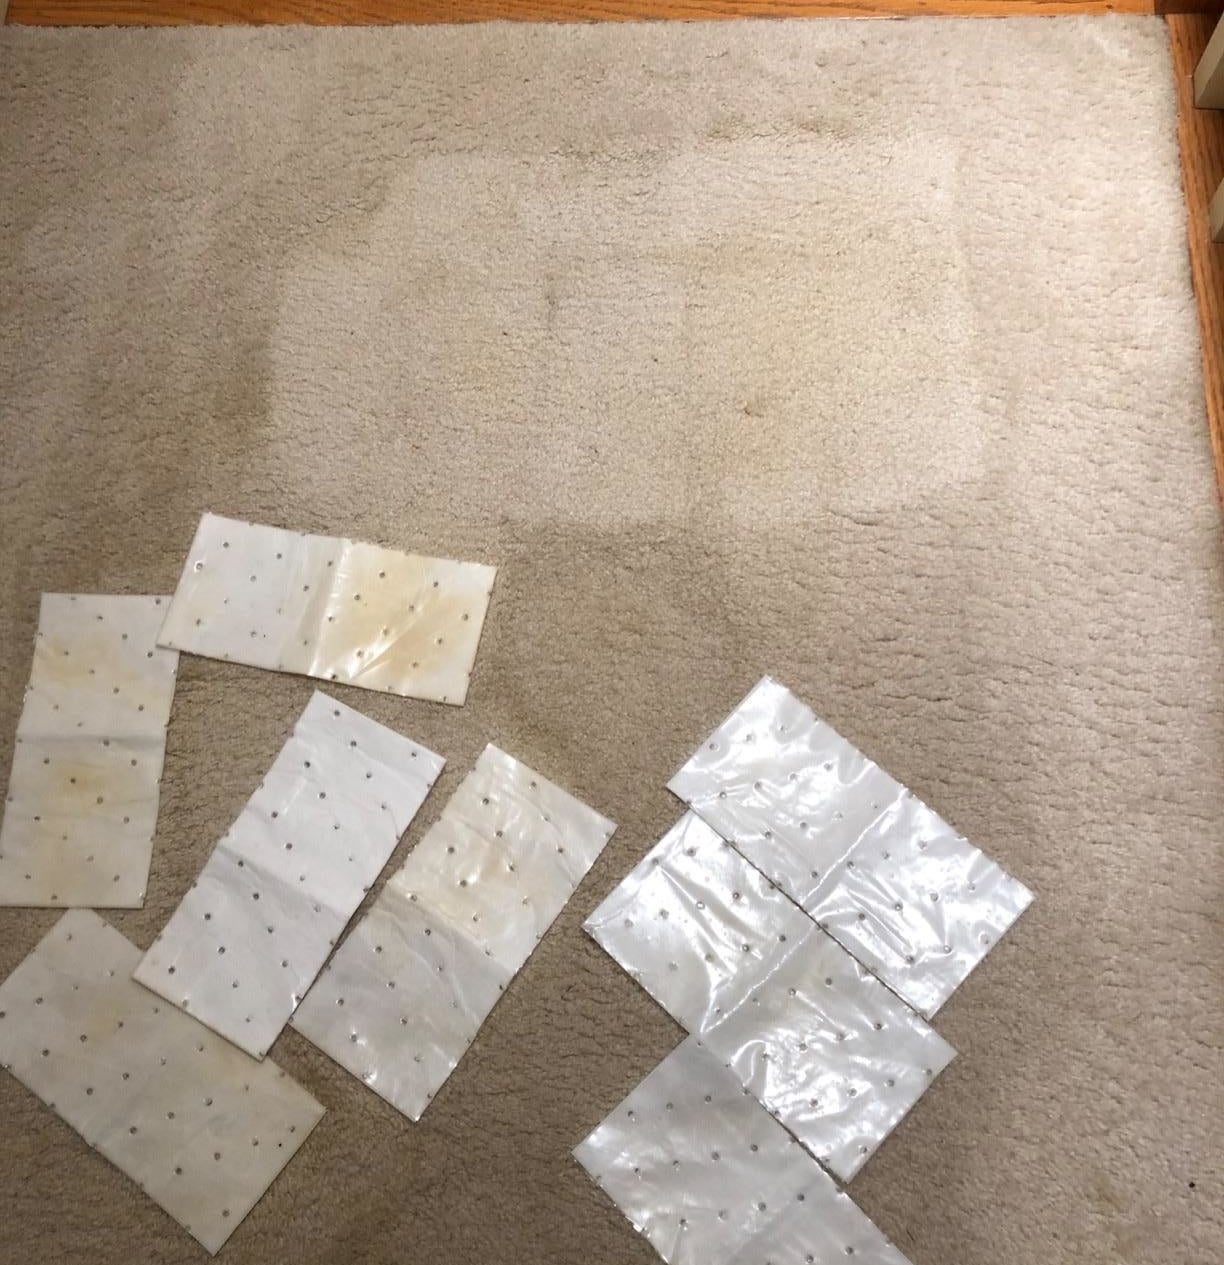 reviewer photo showing cleaning pads on their carpet and visibly cleaner spots where the pads have already been applied 